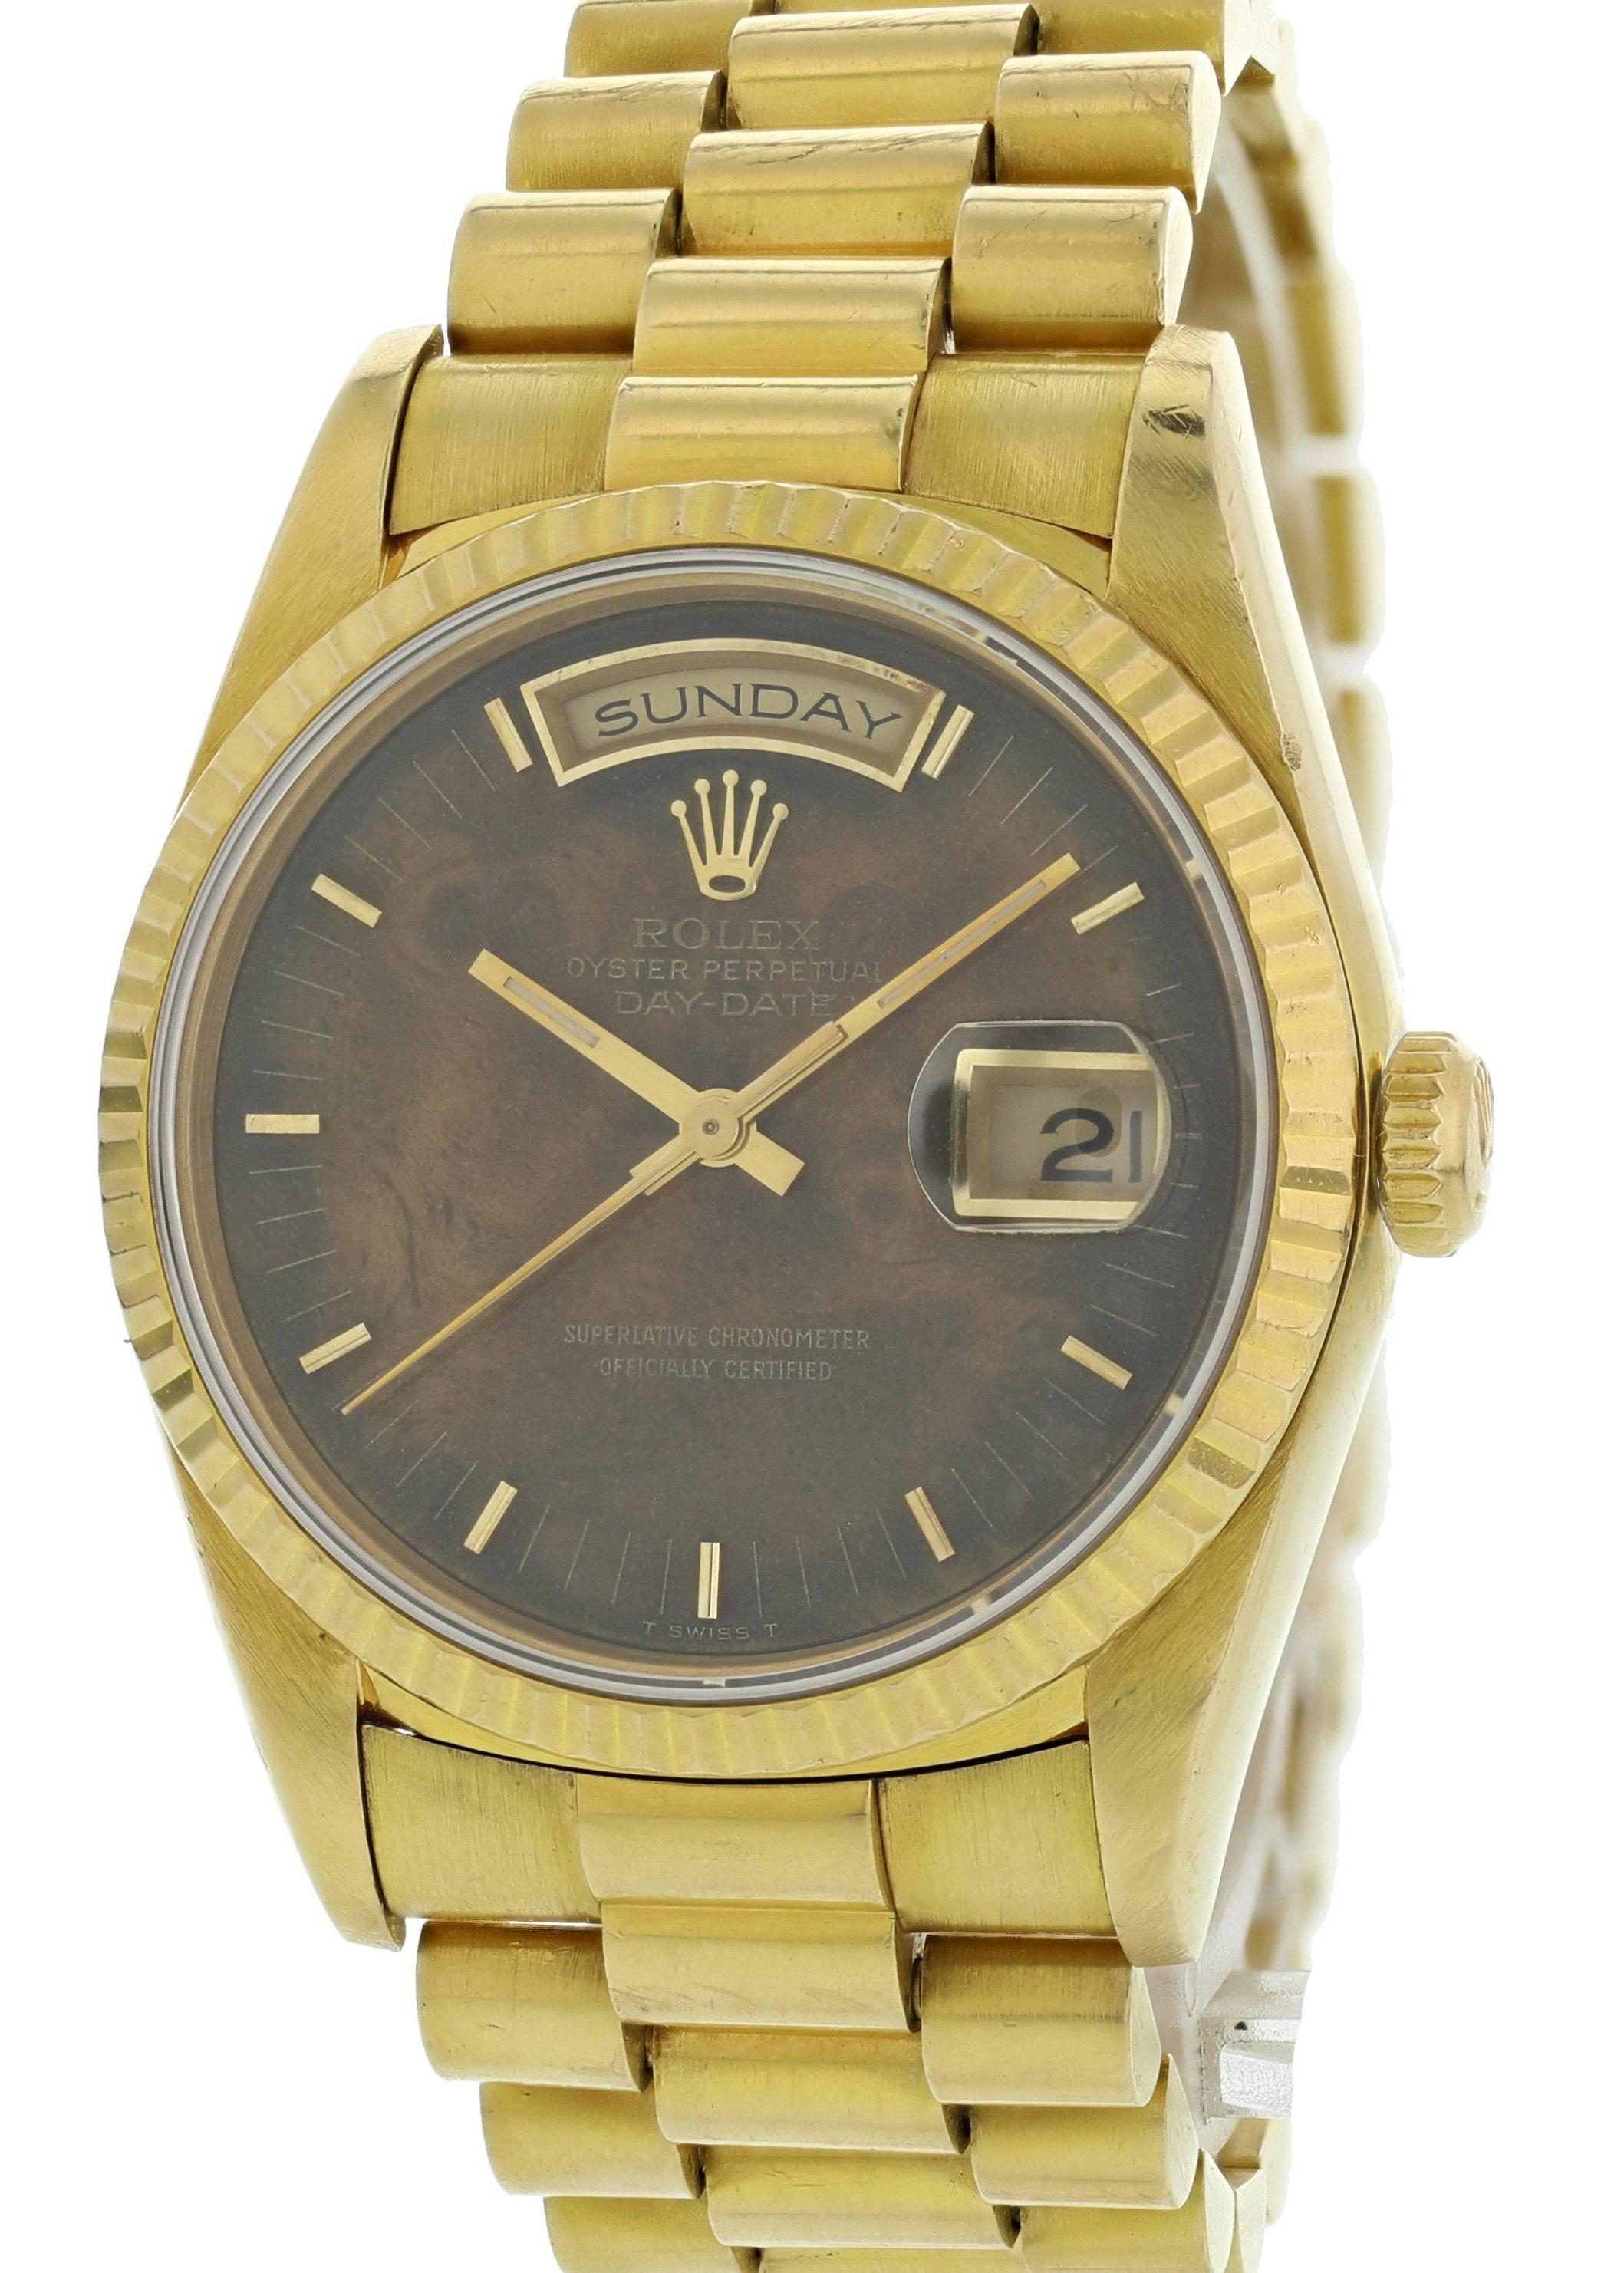 Rolex Oyster Perpetual Day-Date President 18238 Mens Watch. 36mm 18k yellow gold case. 18k yellow gold stationary fluted bezel. Wood dial with luminous hands and gold-tone index hour markers. Day display at 12 o'clock. Date display at 3 o'clock.